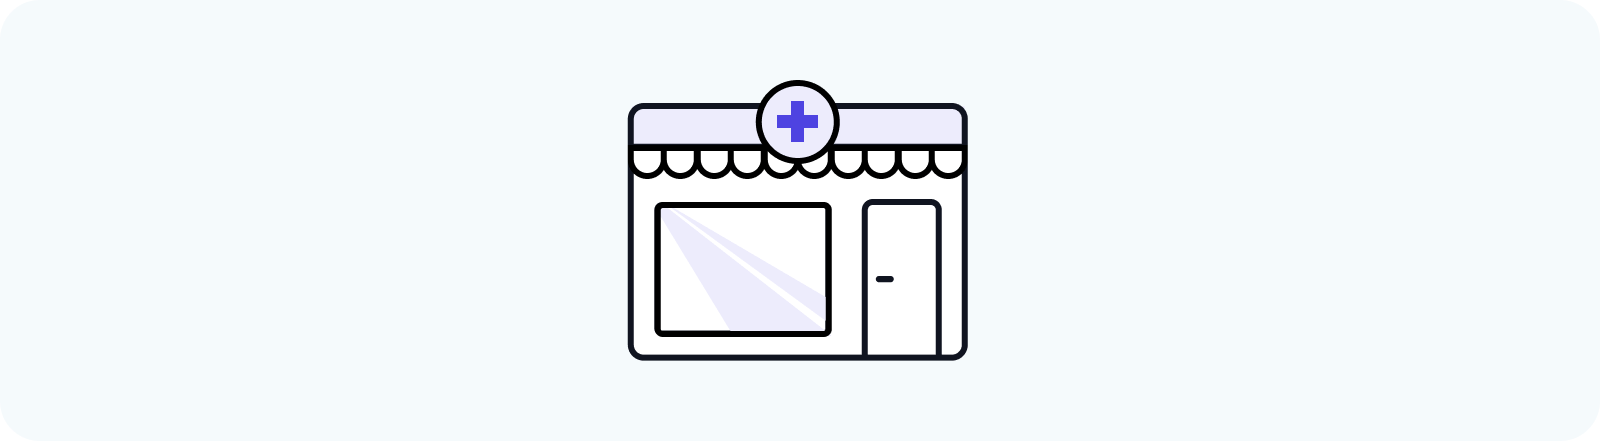 A pharmacy depicted in clipart style.